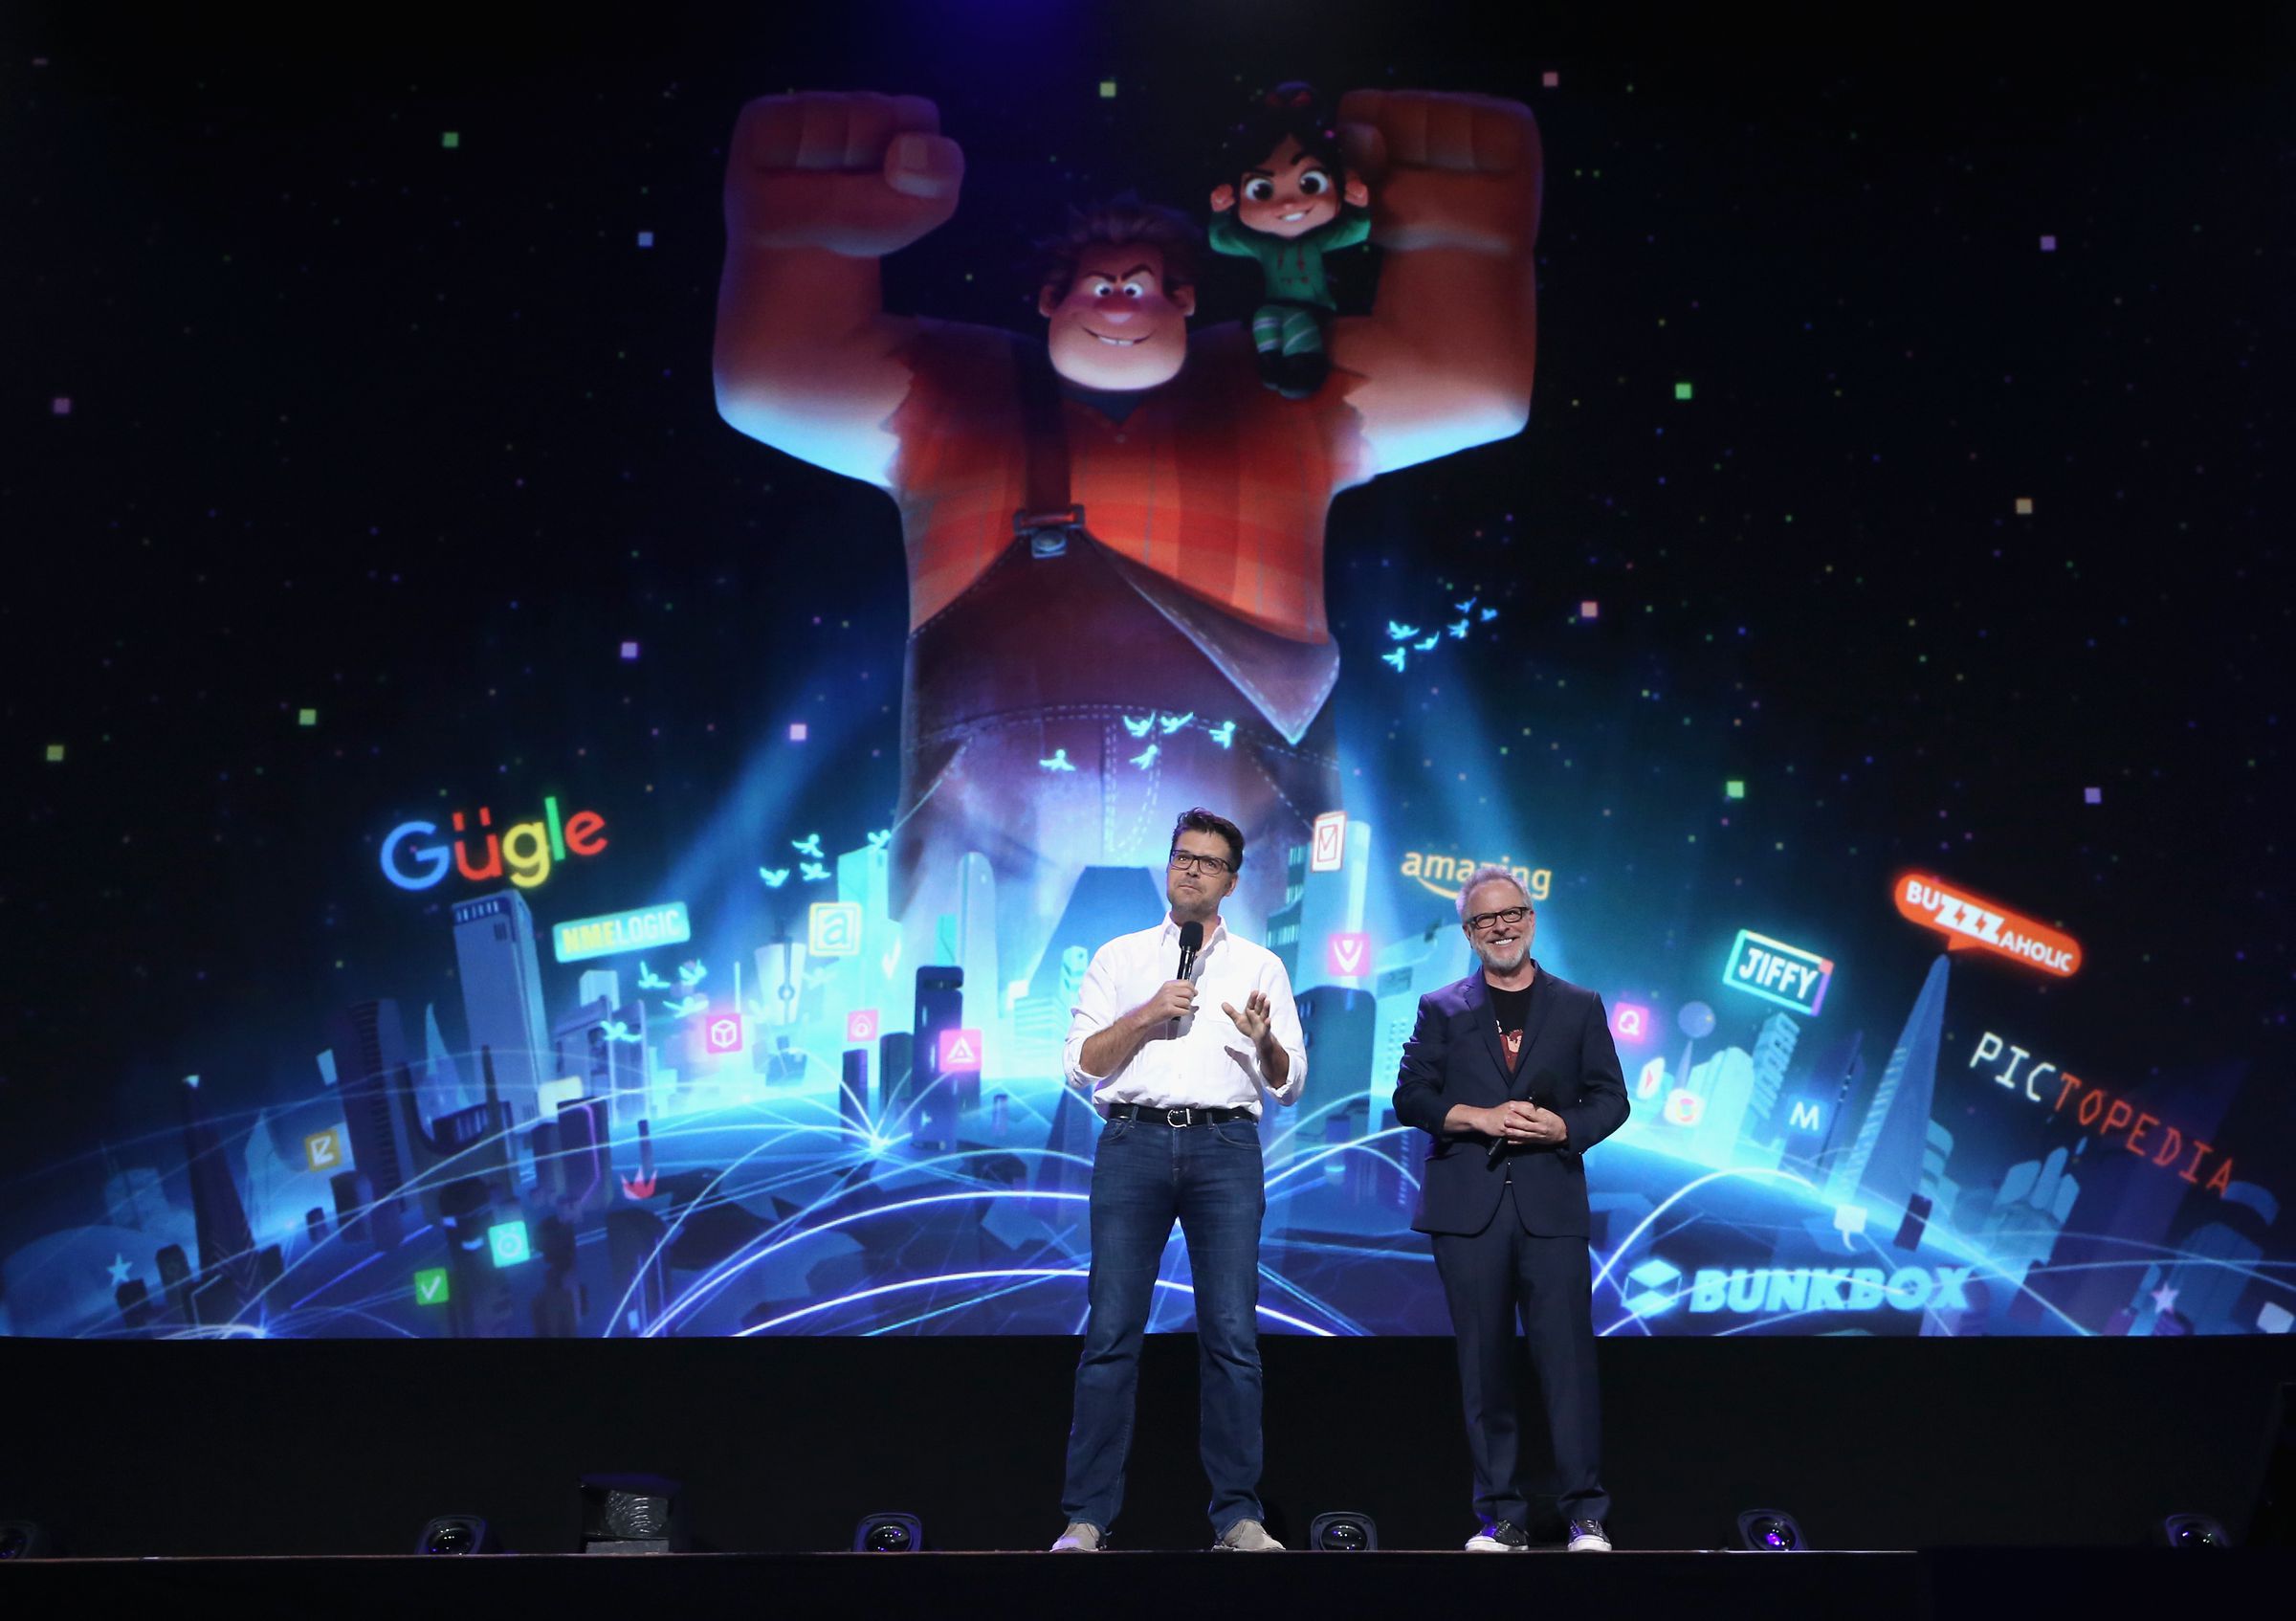 Phil Johnston and Rich Moore at the 2017 D23 Expo, with the movie’s original ‘Gügle’ concept art